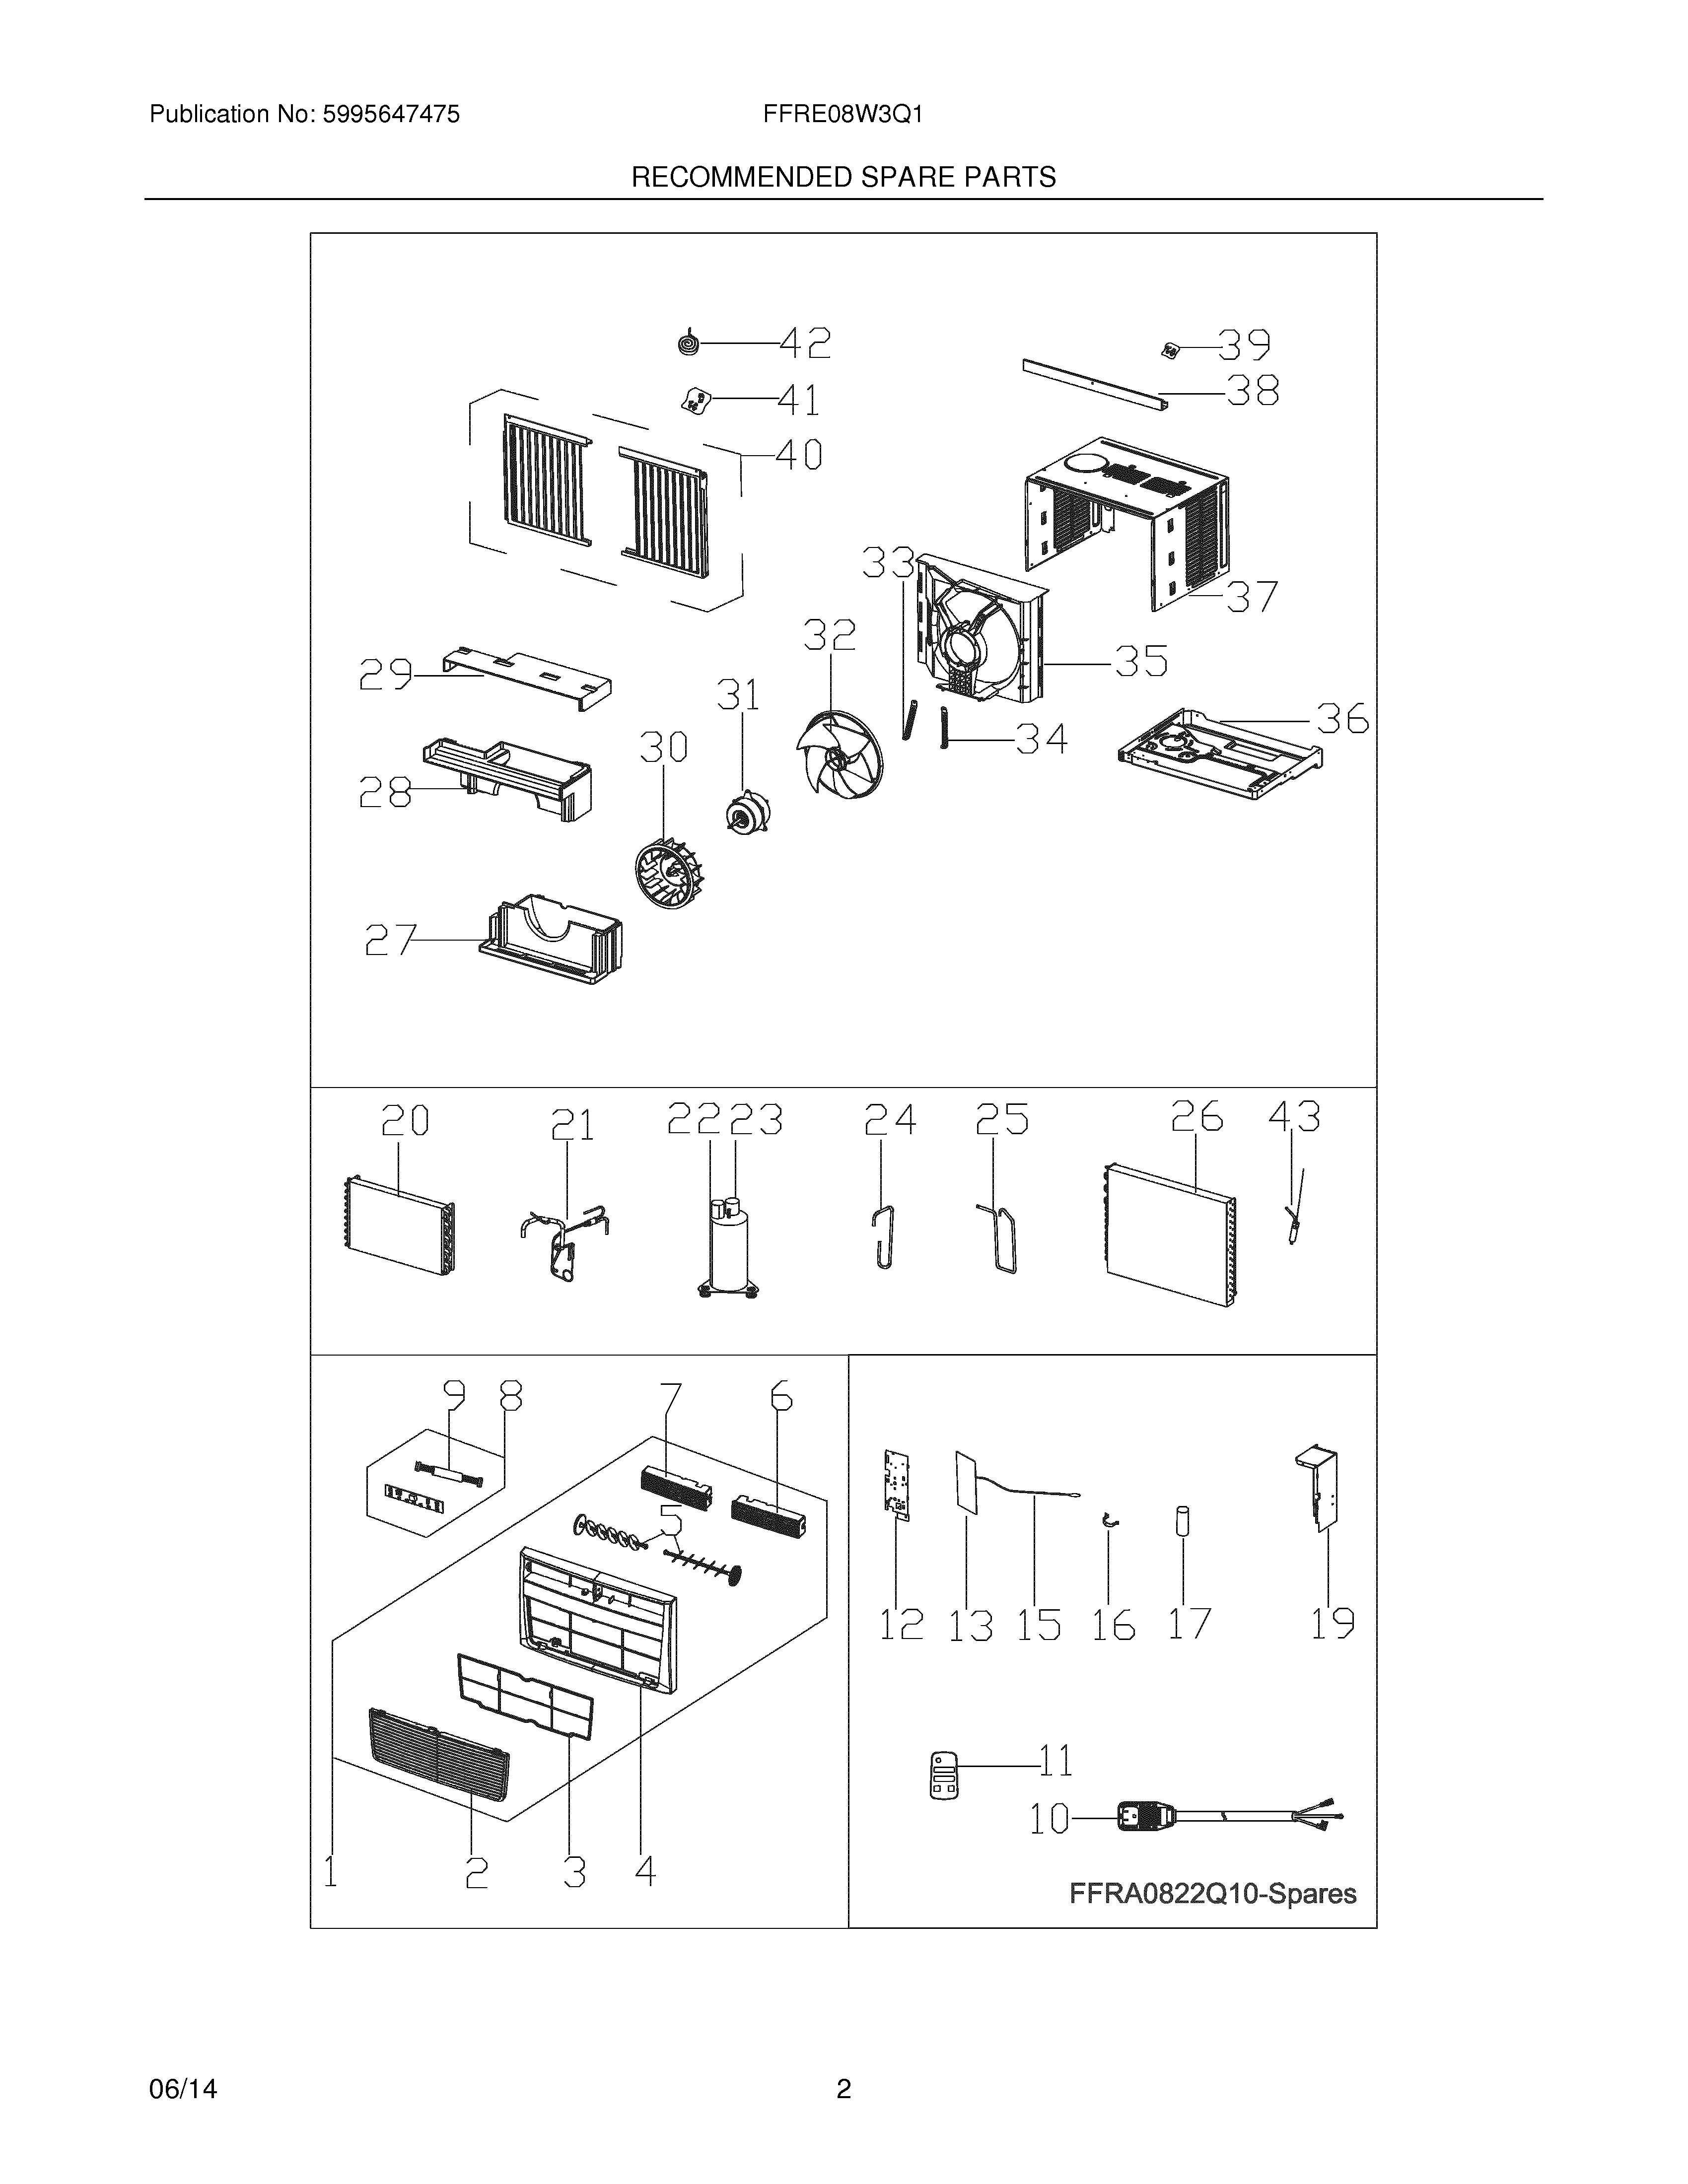 03 - RECOMMENDED SPARE PART